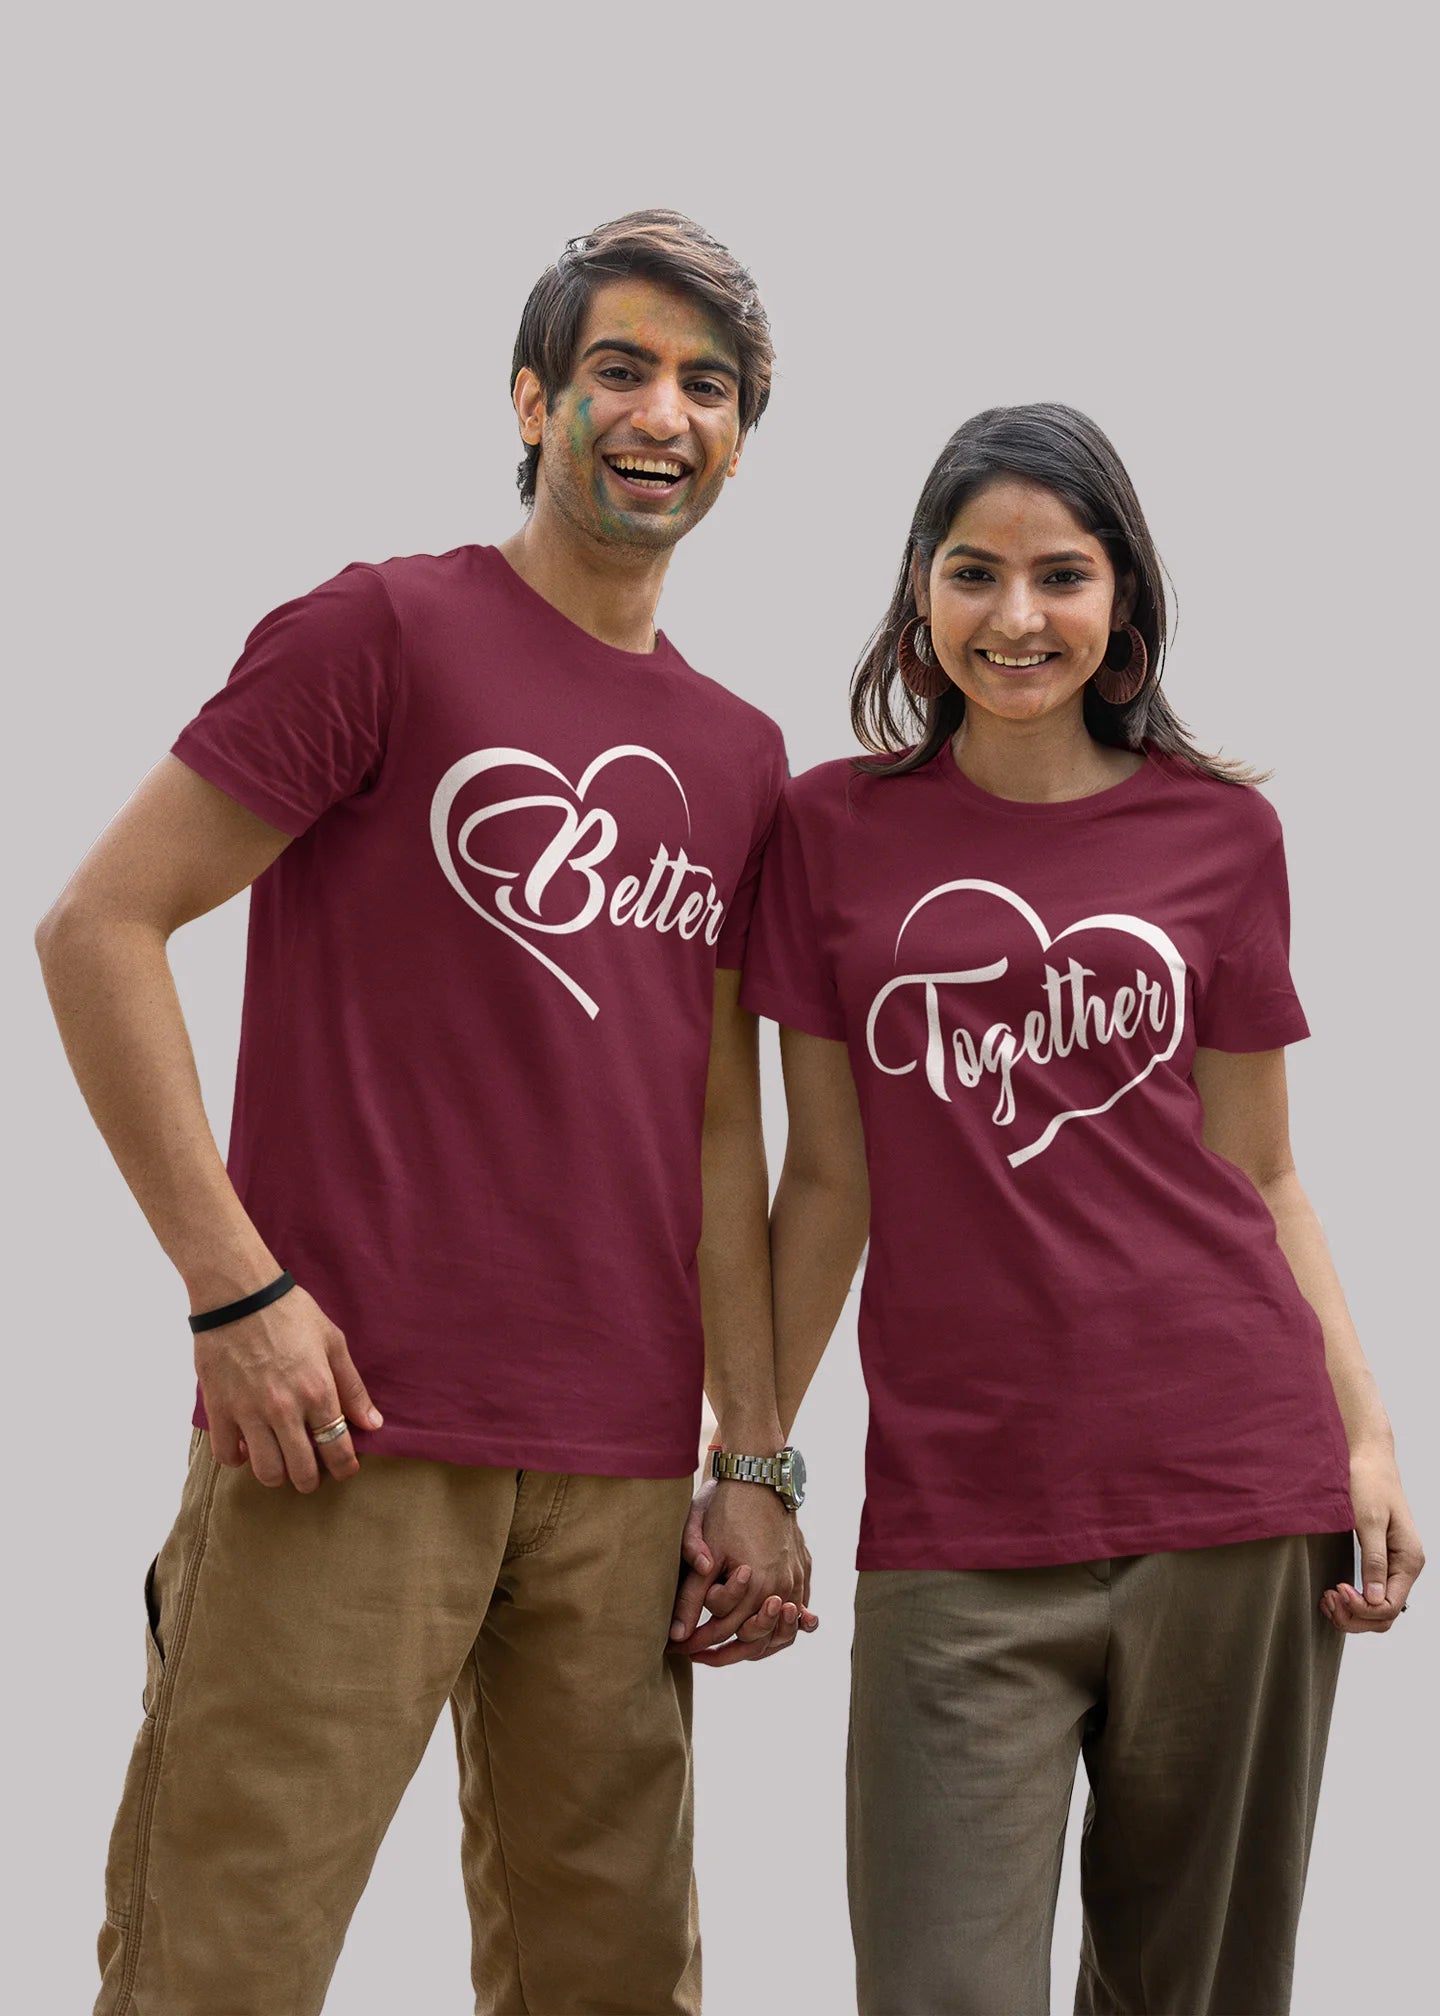 Better Together Printed Couple T-shirt